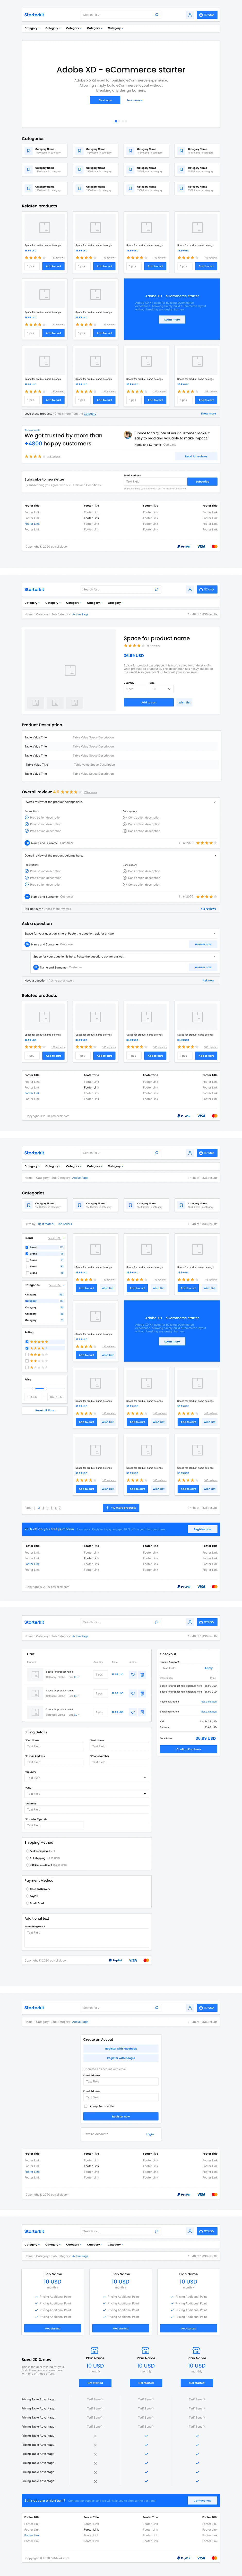 Starter eCommerce Template for Adobe XD - Starting with building an eCommerce project for Adobe XD? This Kit will help you jump and set-up all necessary things to start creating next future of eCommerce.